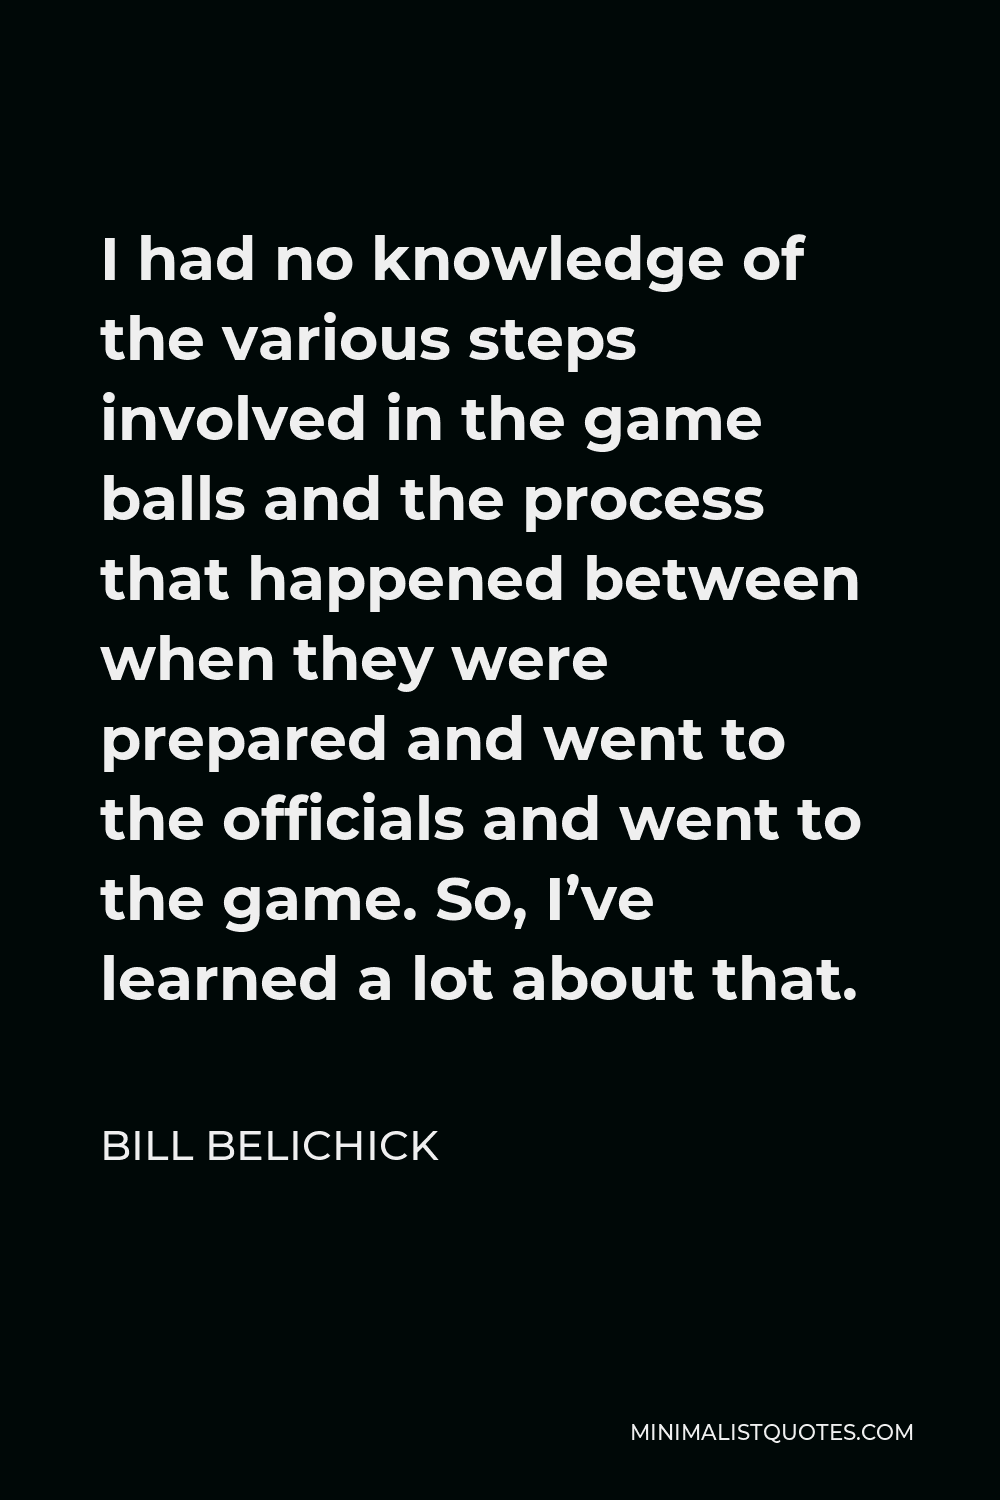 Bill Belichick Quote - I had no knowledge of the various steps involved in the game balls and the process that happened between when they were prepared and went to the officials and went to the game. So, I’ve learned a lot about that.